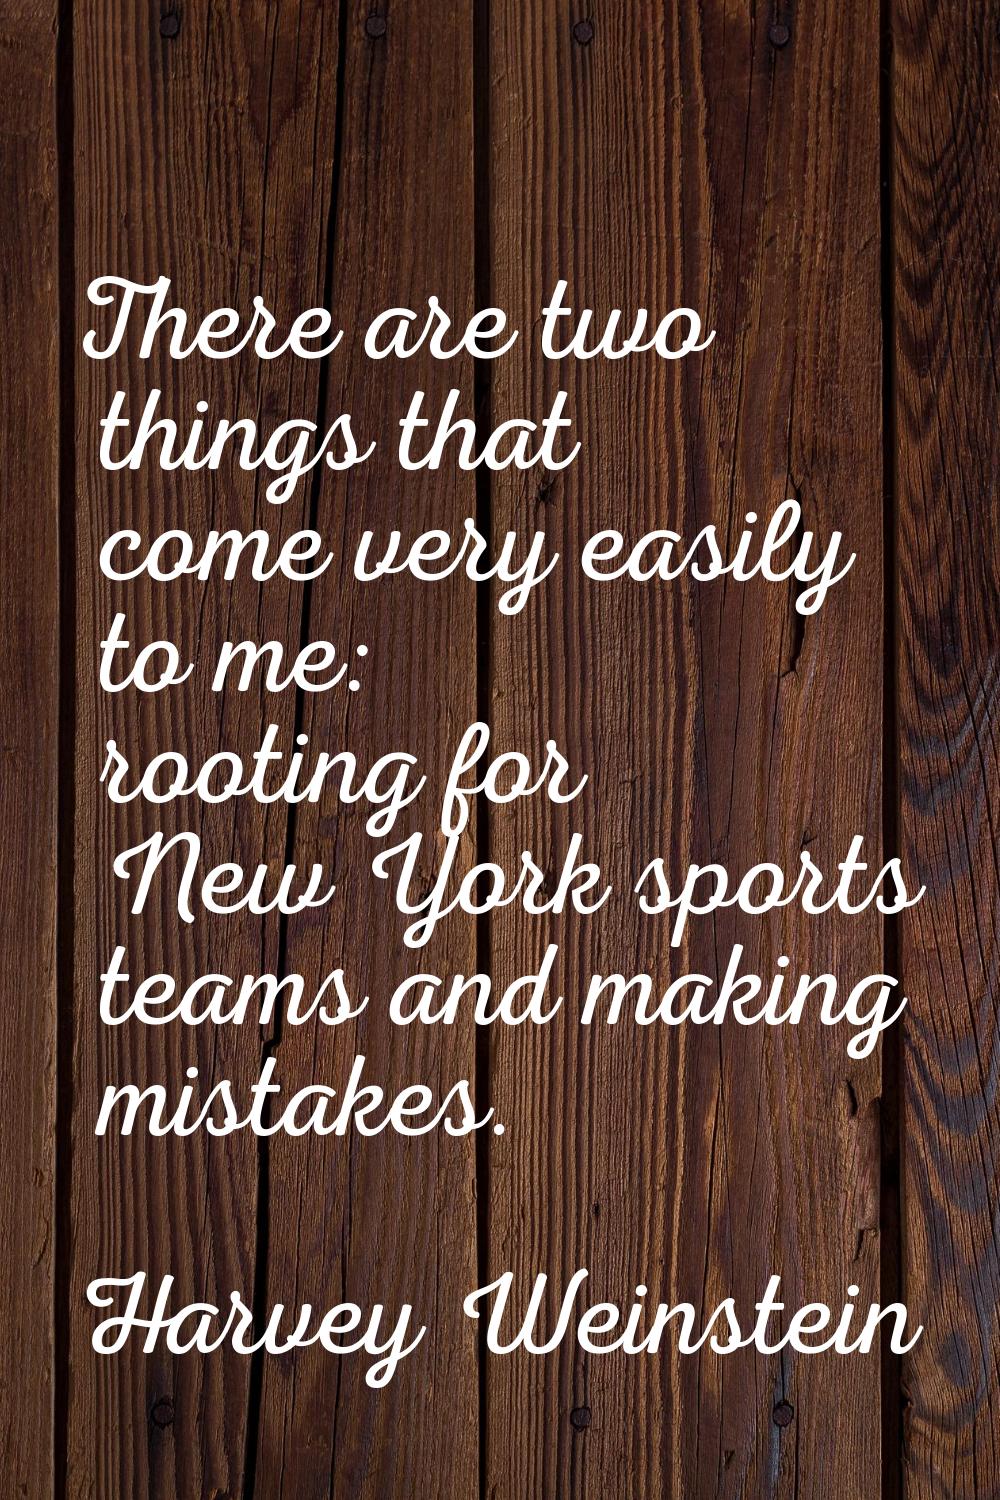 There are two things that come very easily to me: rooting for New York sports teams and making mist